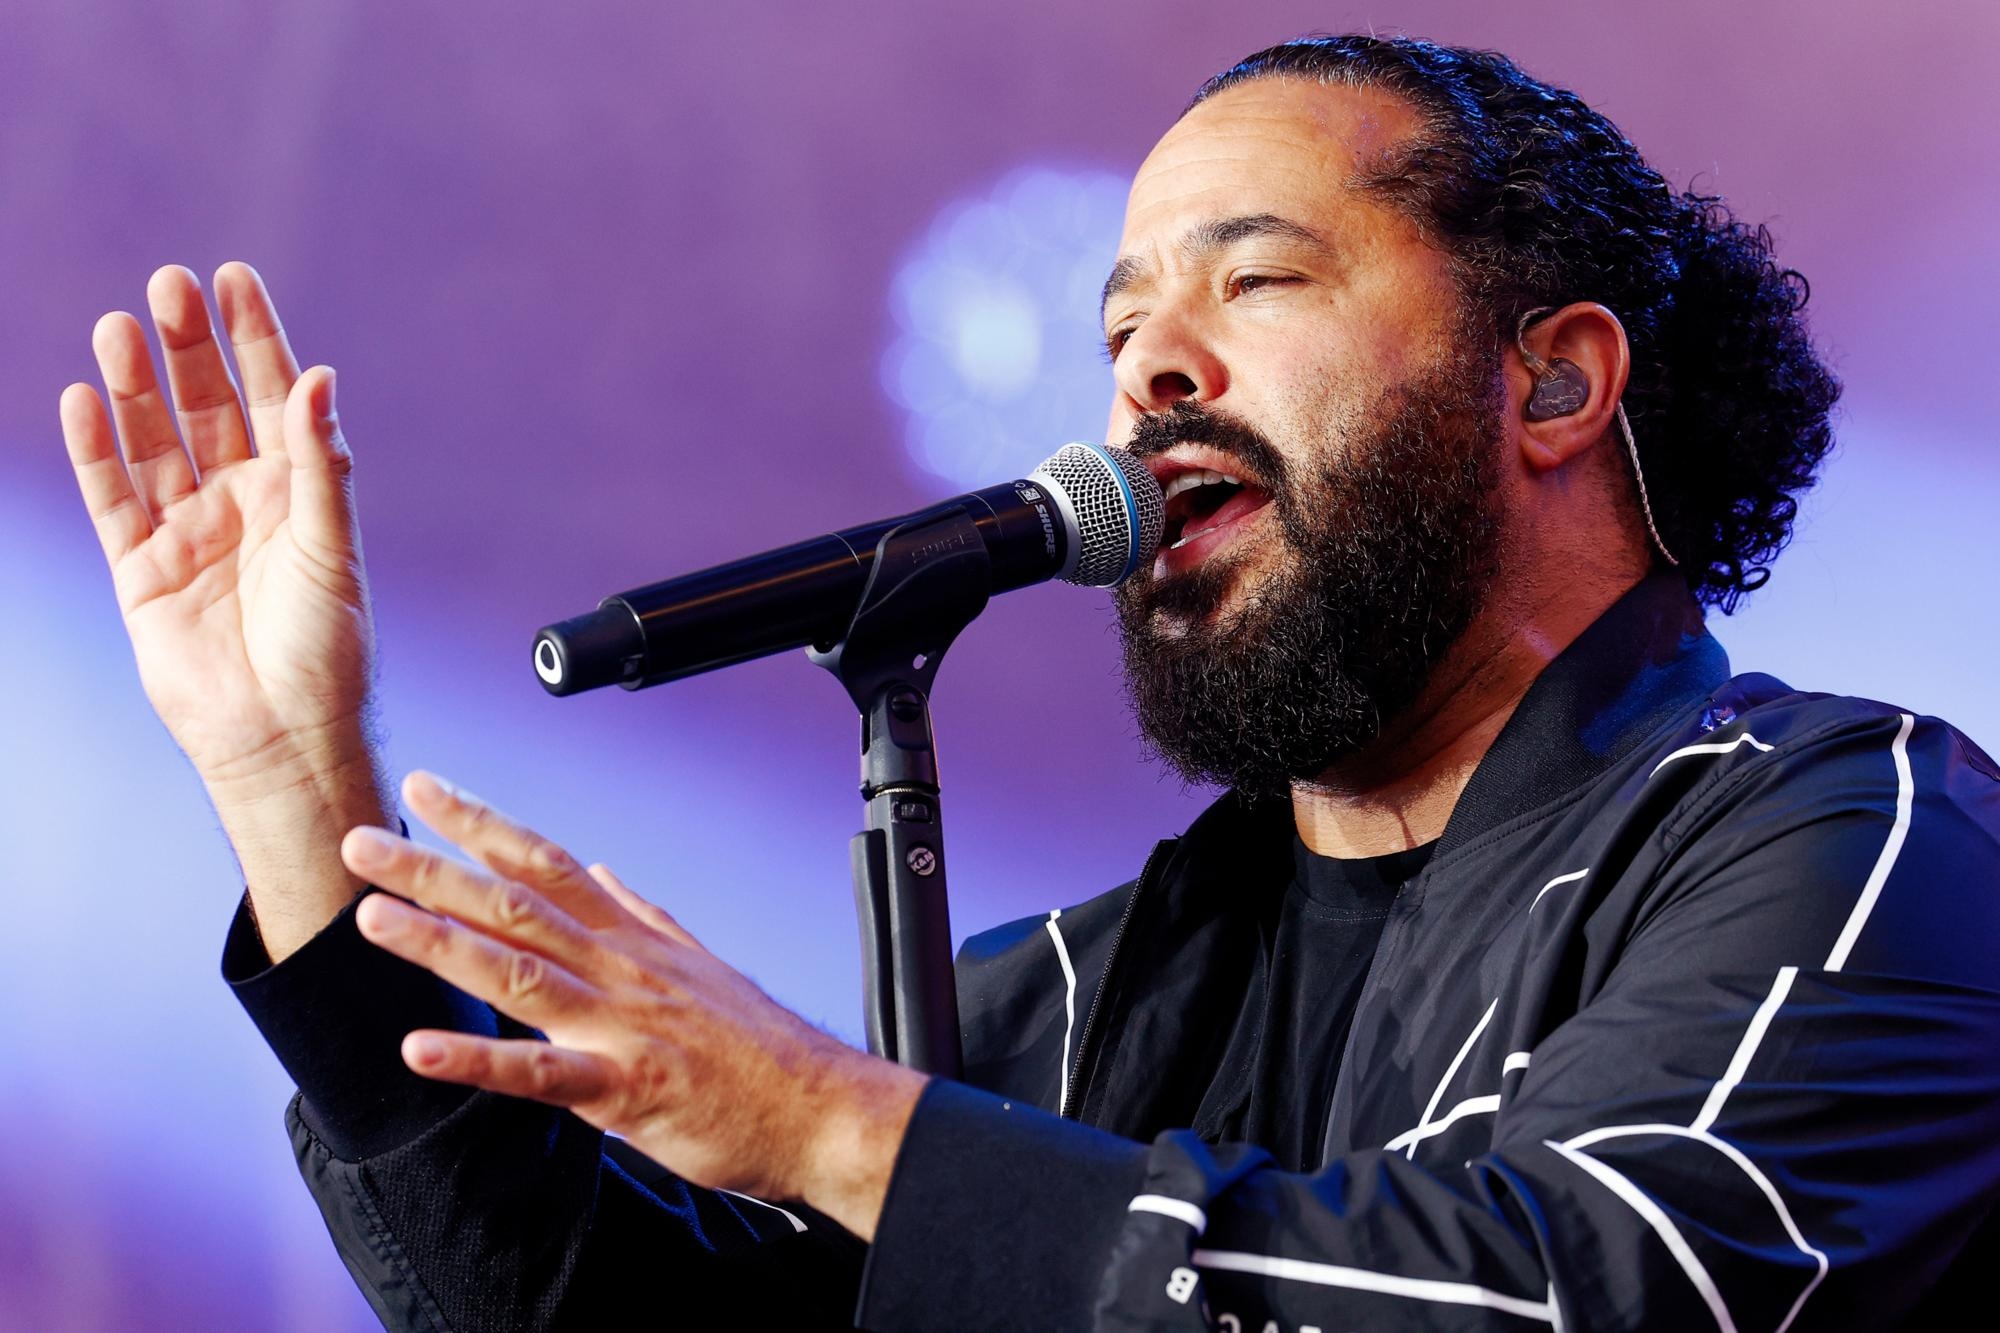 Live from Lindenbühne: a captivating finale to the festival with Adel Tawil